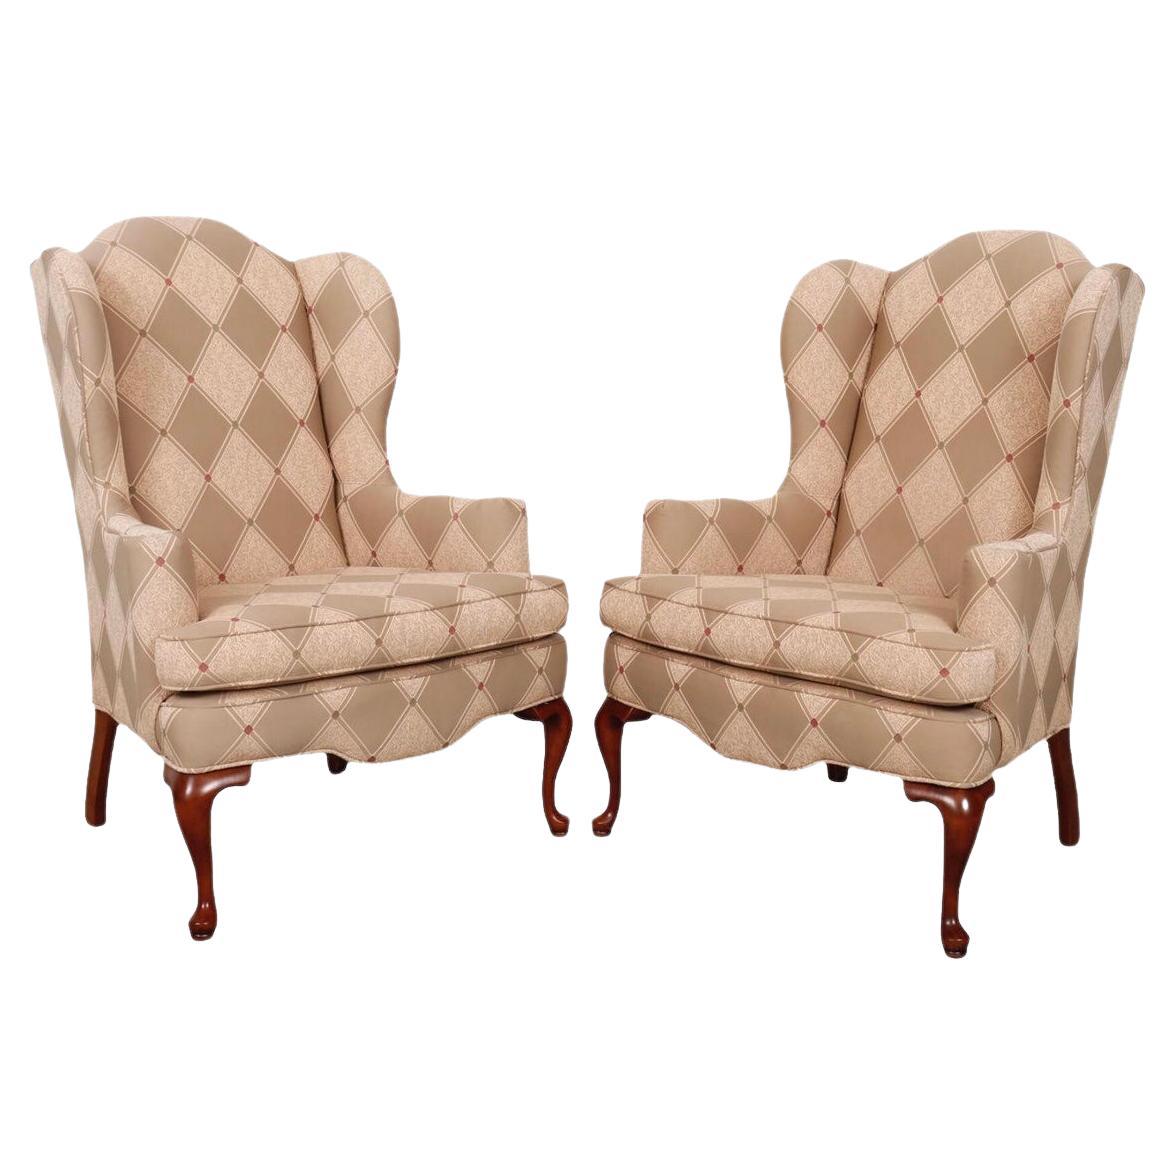 Queen Anne Style Wingback Chairs - a Pair For Sale